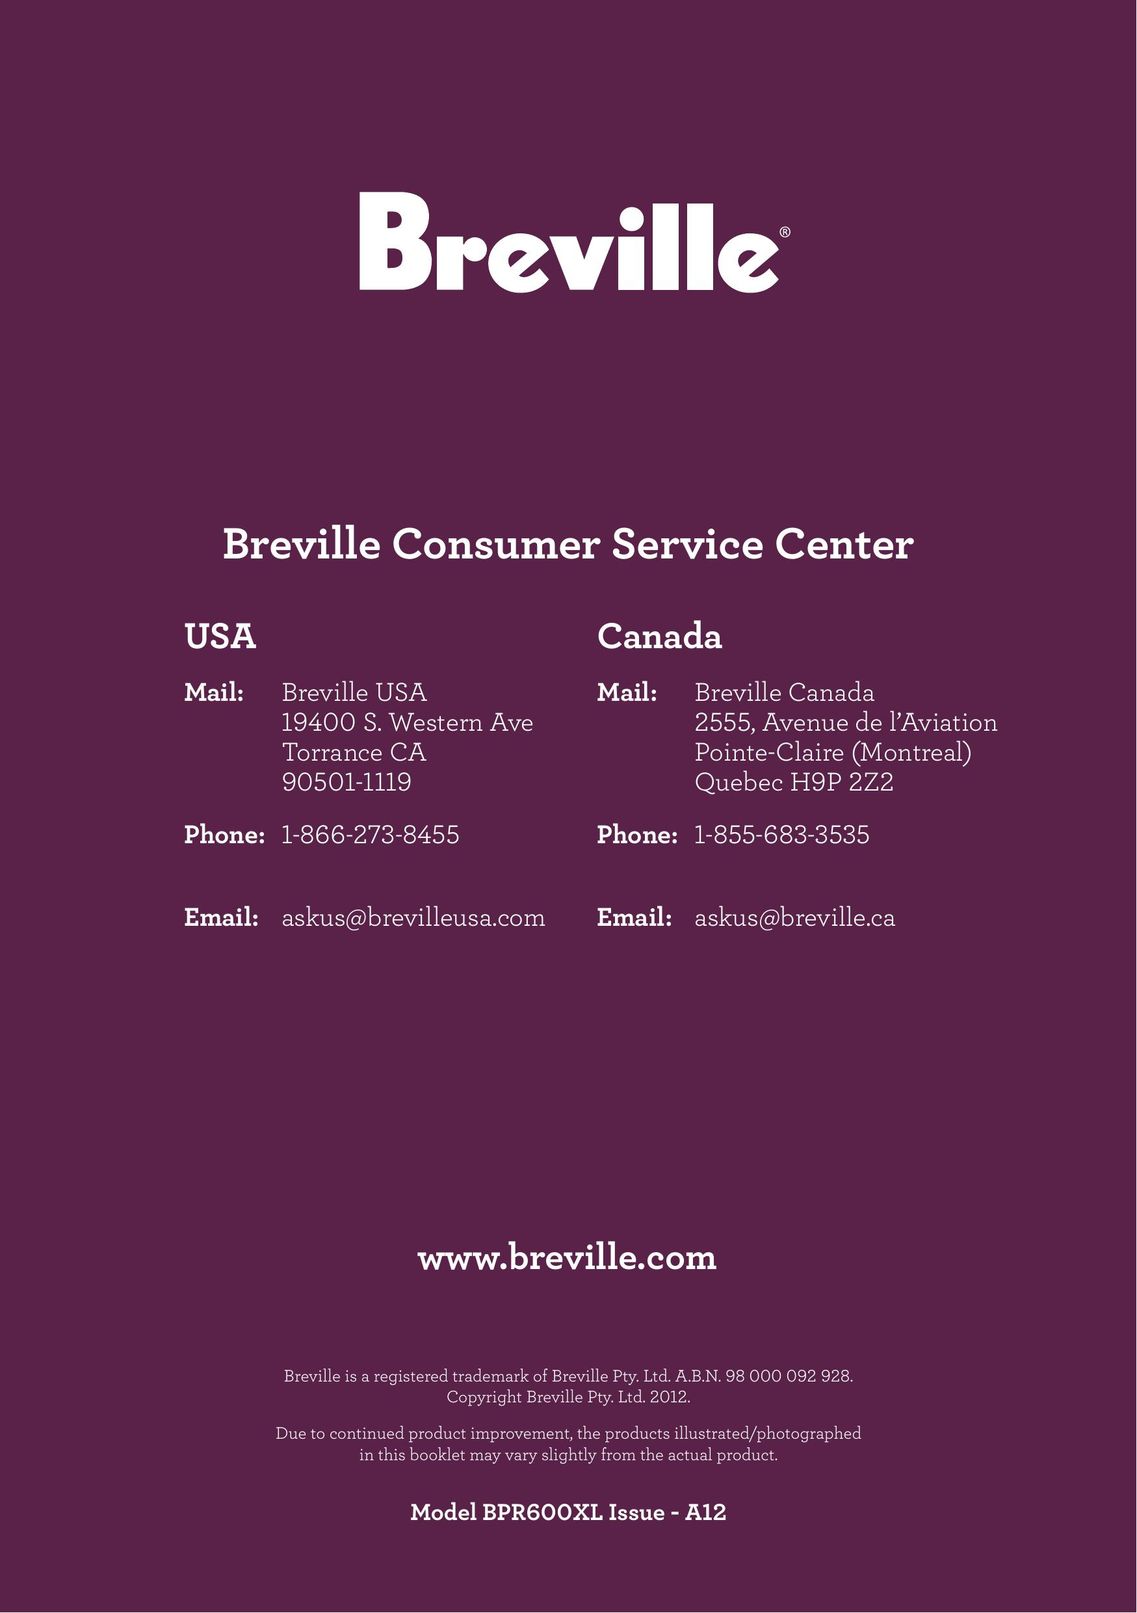 Breville BPR600XL Issue - A12 Electric Pressure Cooker User Manual